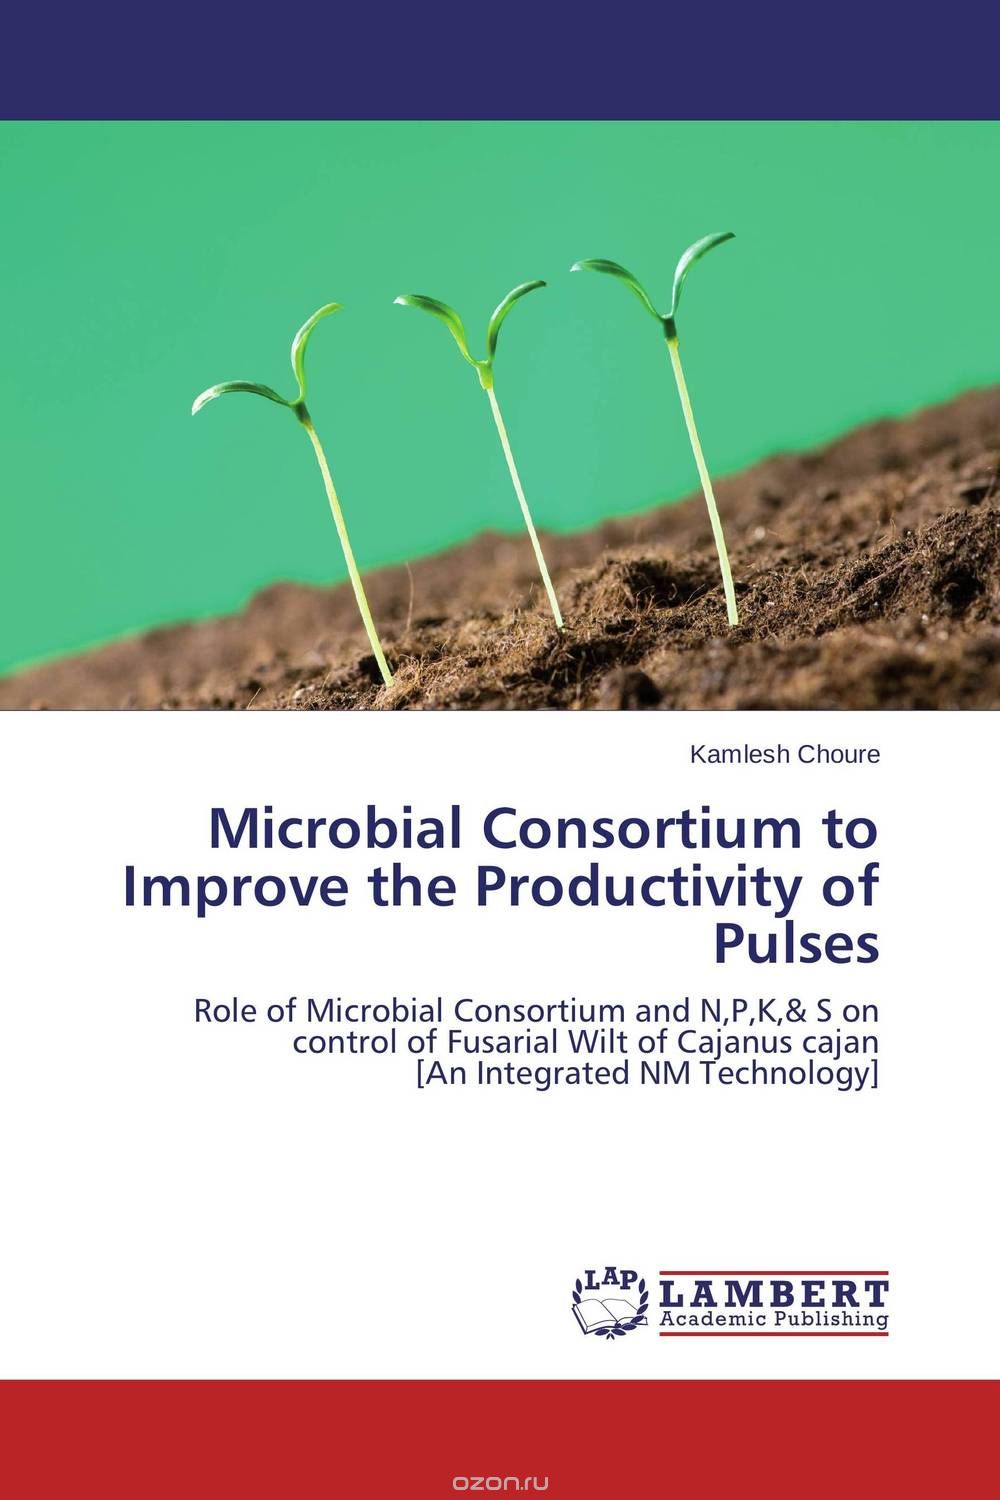 Microbial Consortium to Improve the Productivity of Pulses